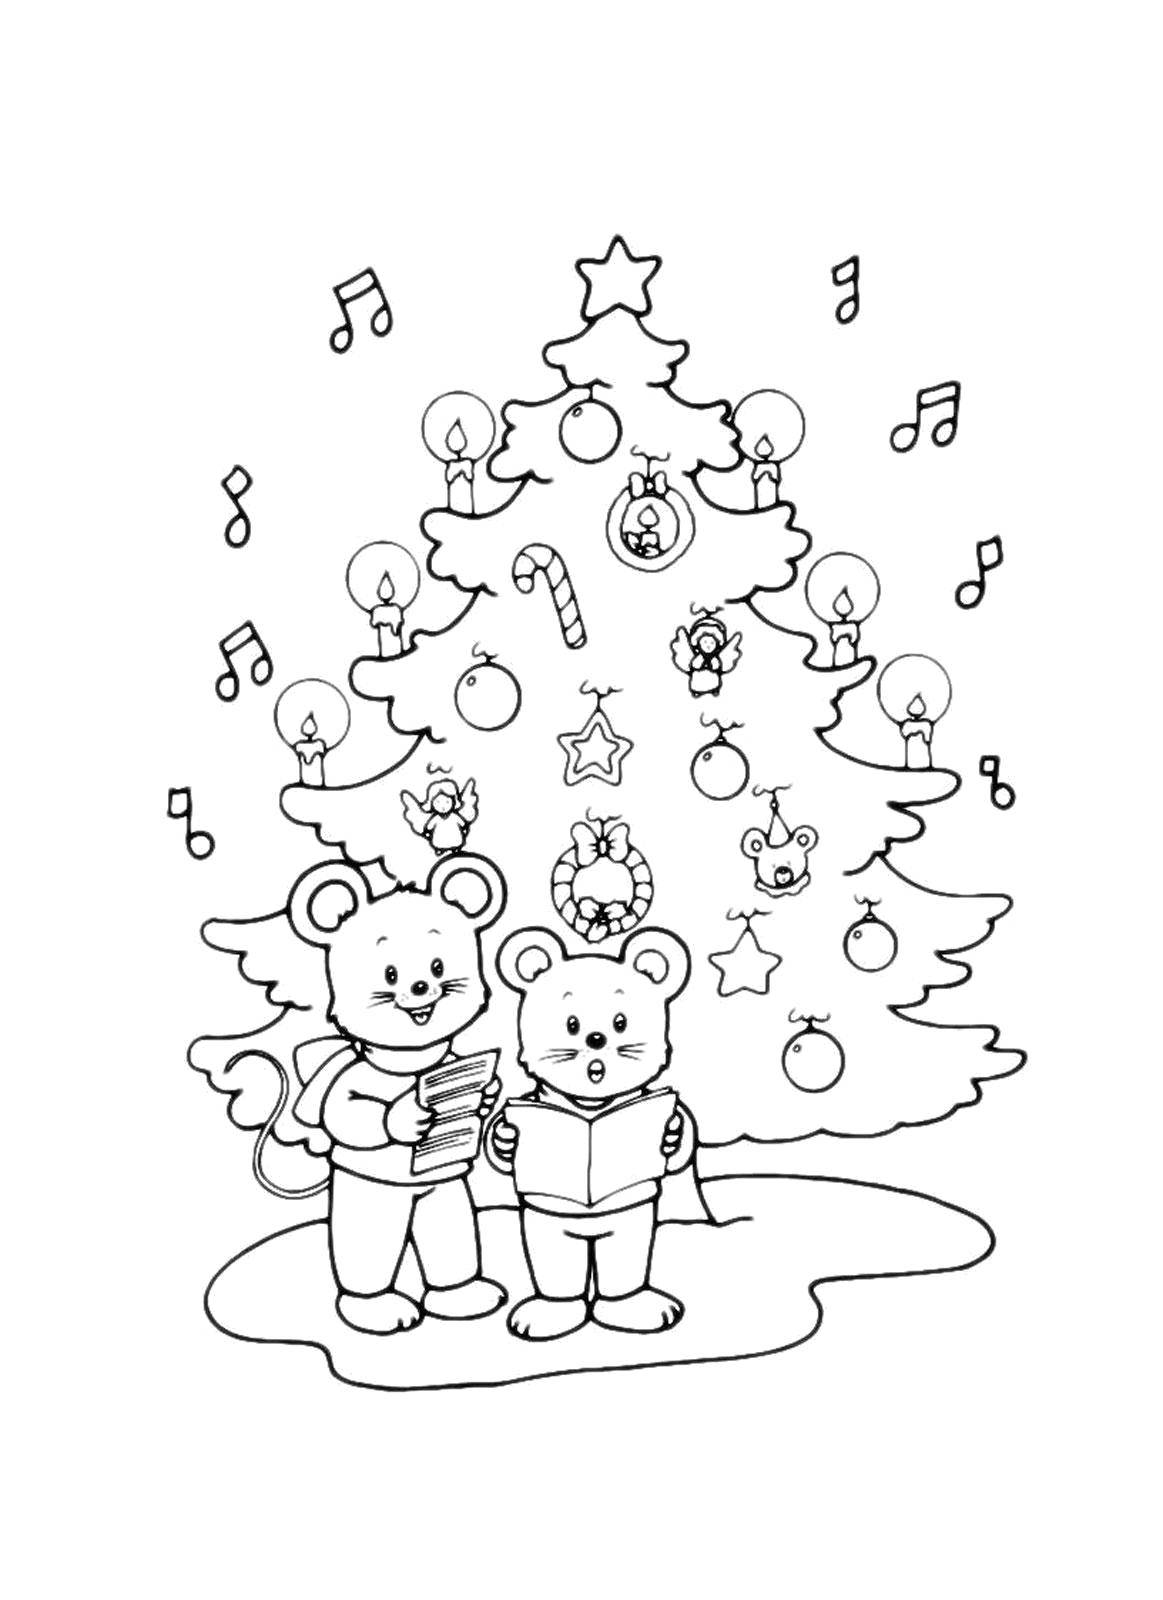 Coloring Mice singing Christmas songs. Category coloring Christmas tree. Tags:  Christmas, Christmas toy, Christmas tree, gifts.